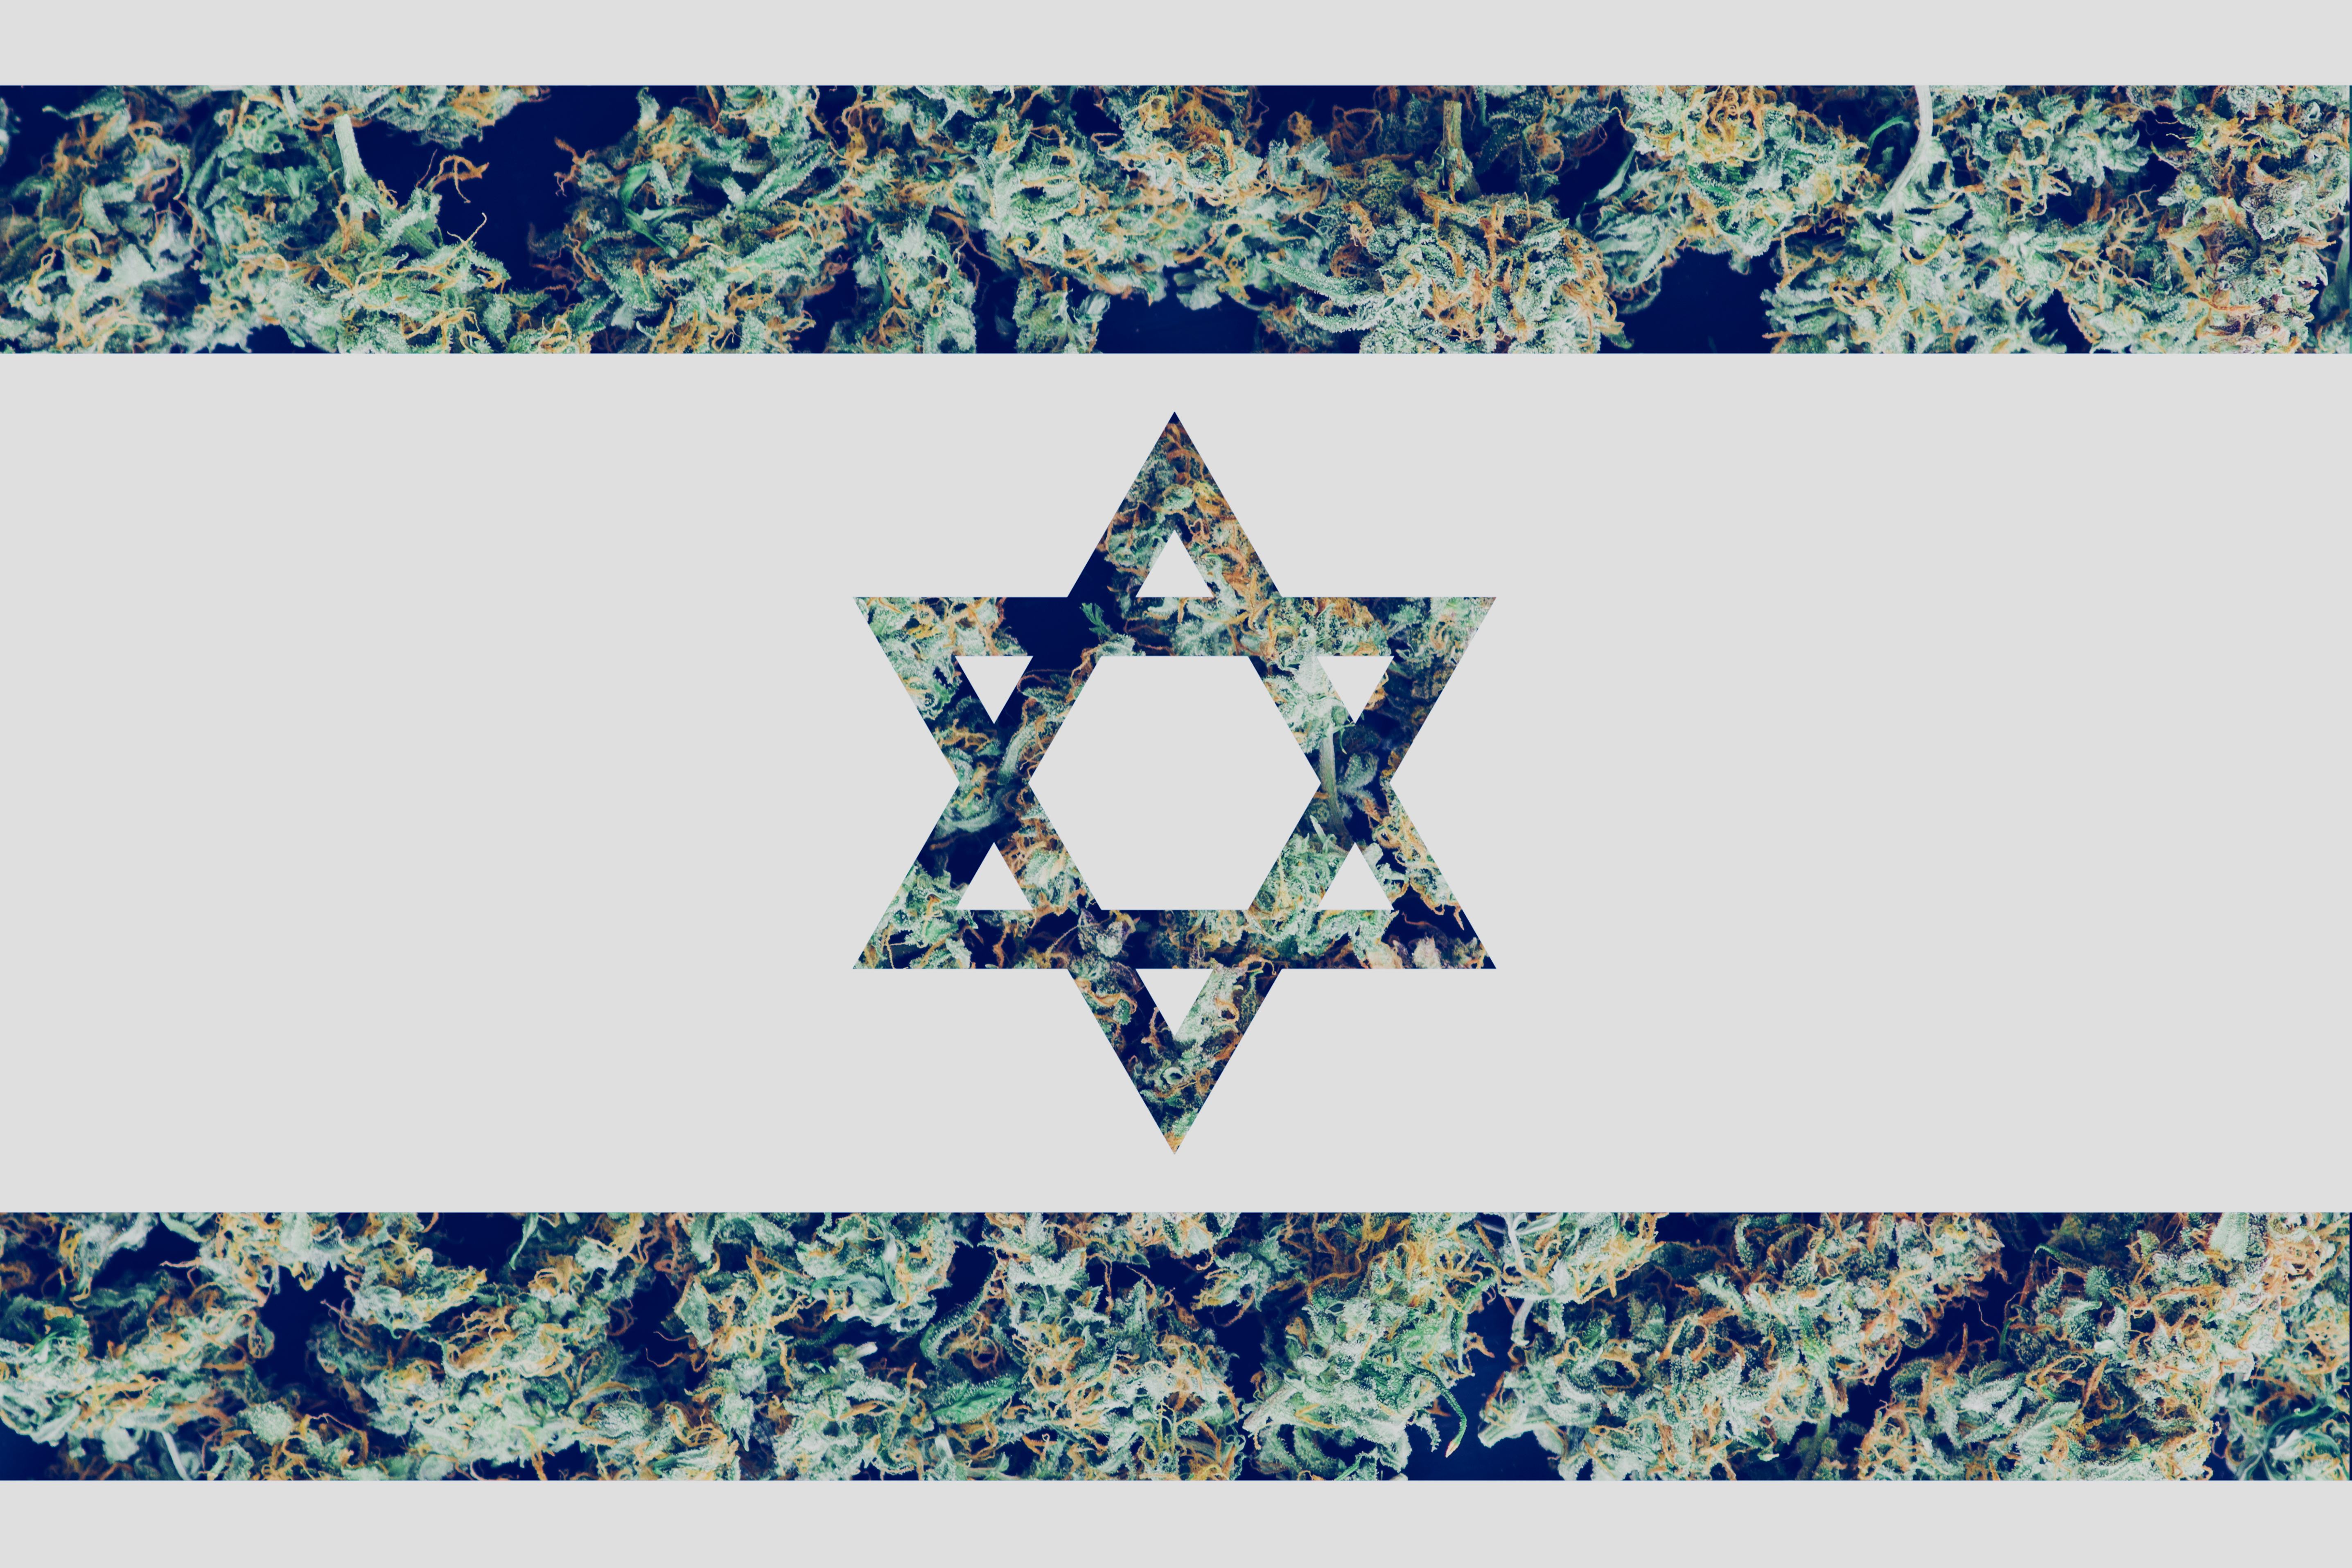 Israel Government Going for Full Cannabis Decriminalization and Expungement